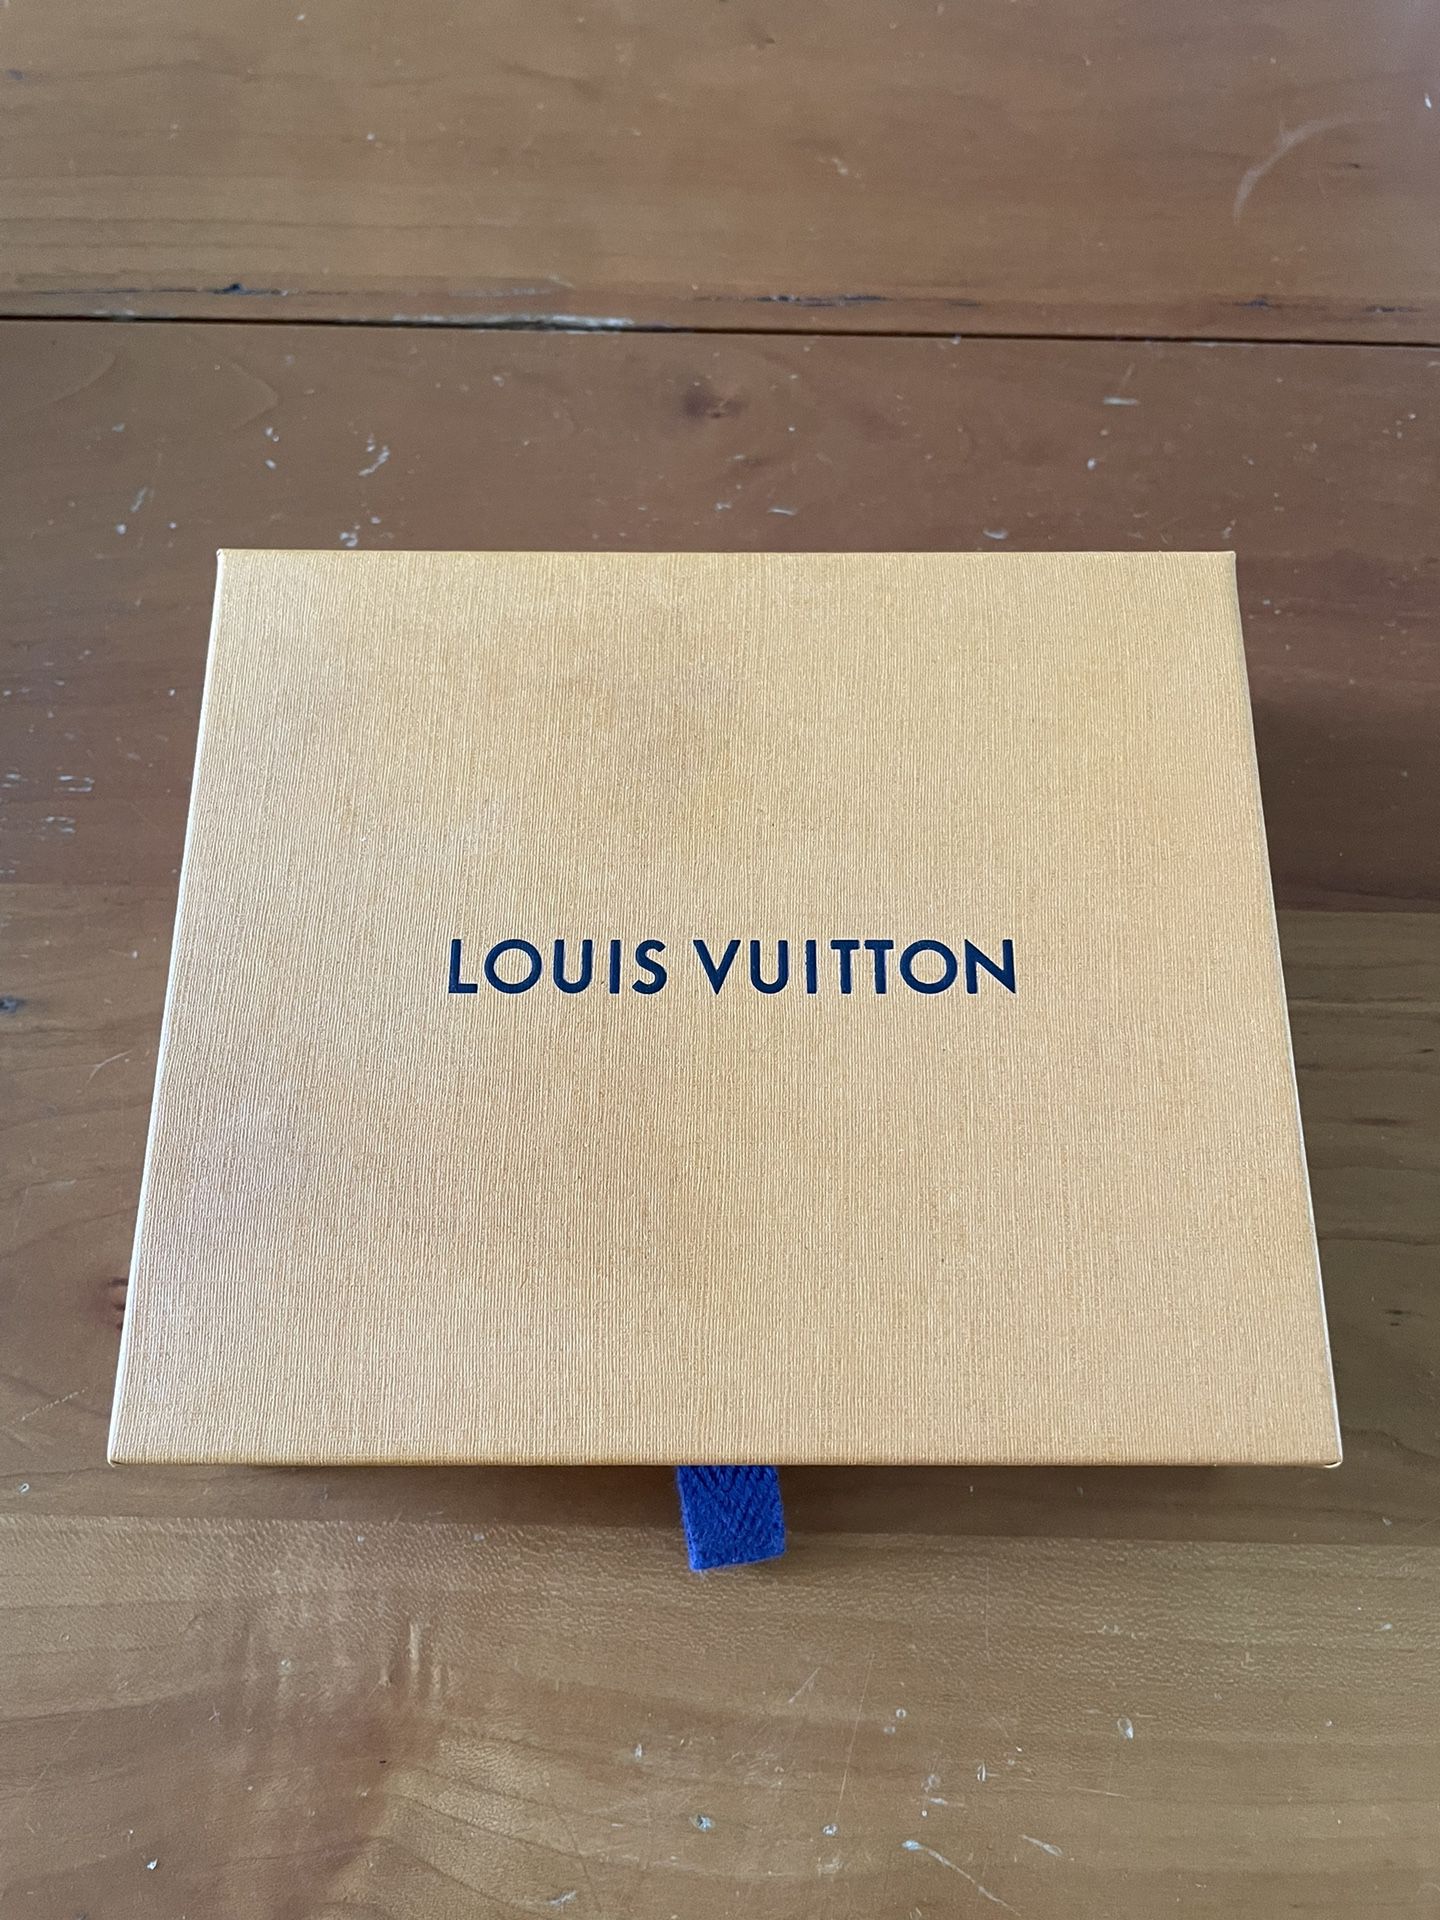 LOUIS VUITTON SLENDER ID WALLET, TAIGA LEATHER, #M64005 for Sale in  Antioch, CA - OfferUp